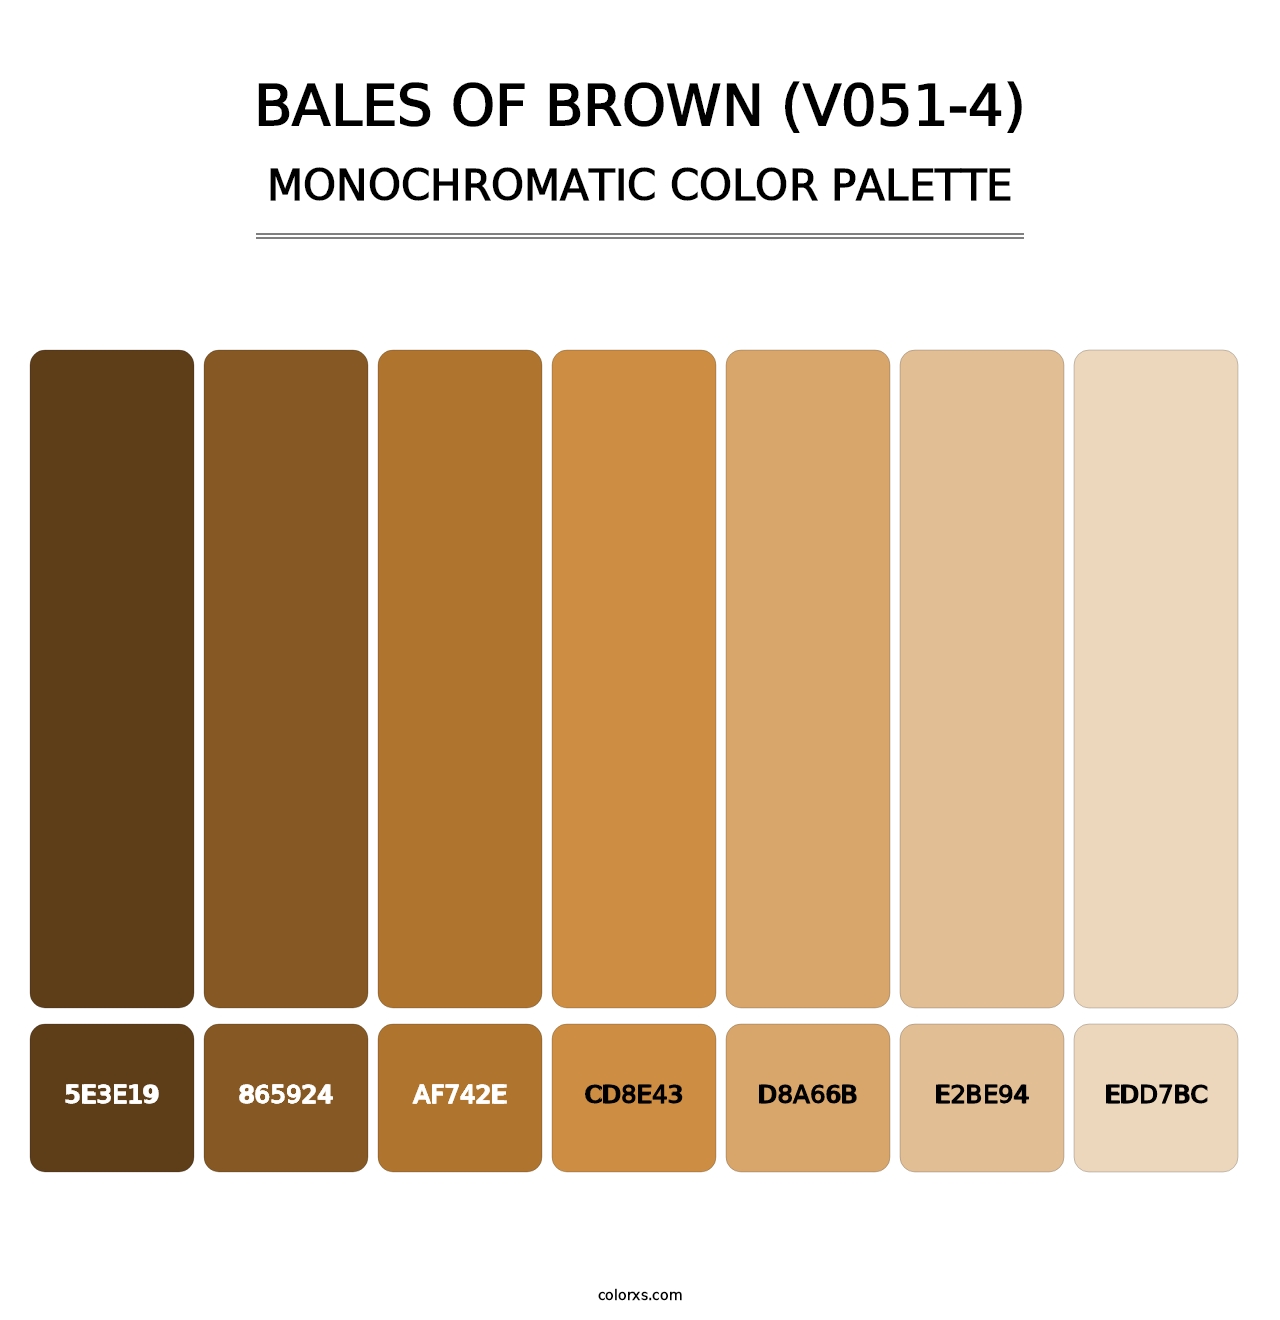 Bales of Brown (V051-4) - Monochromatic Color Palette